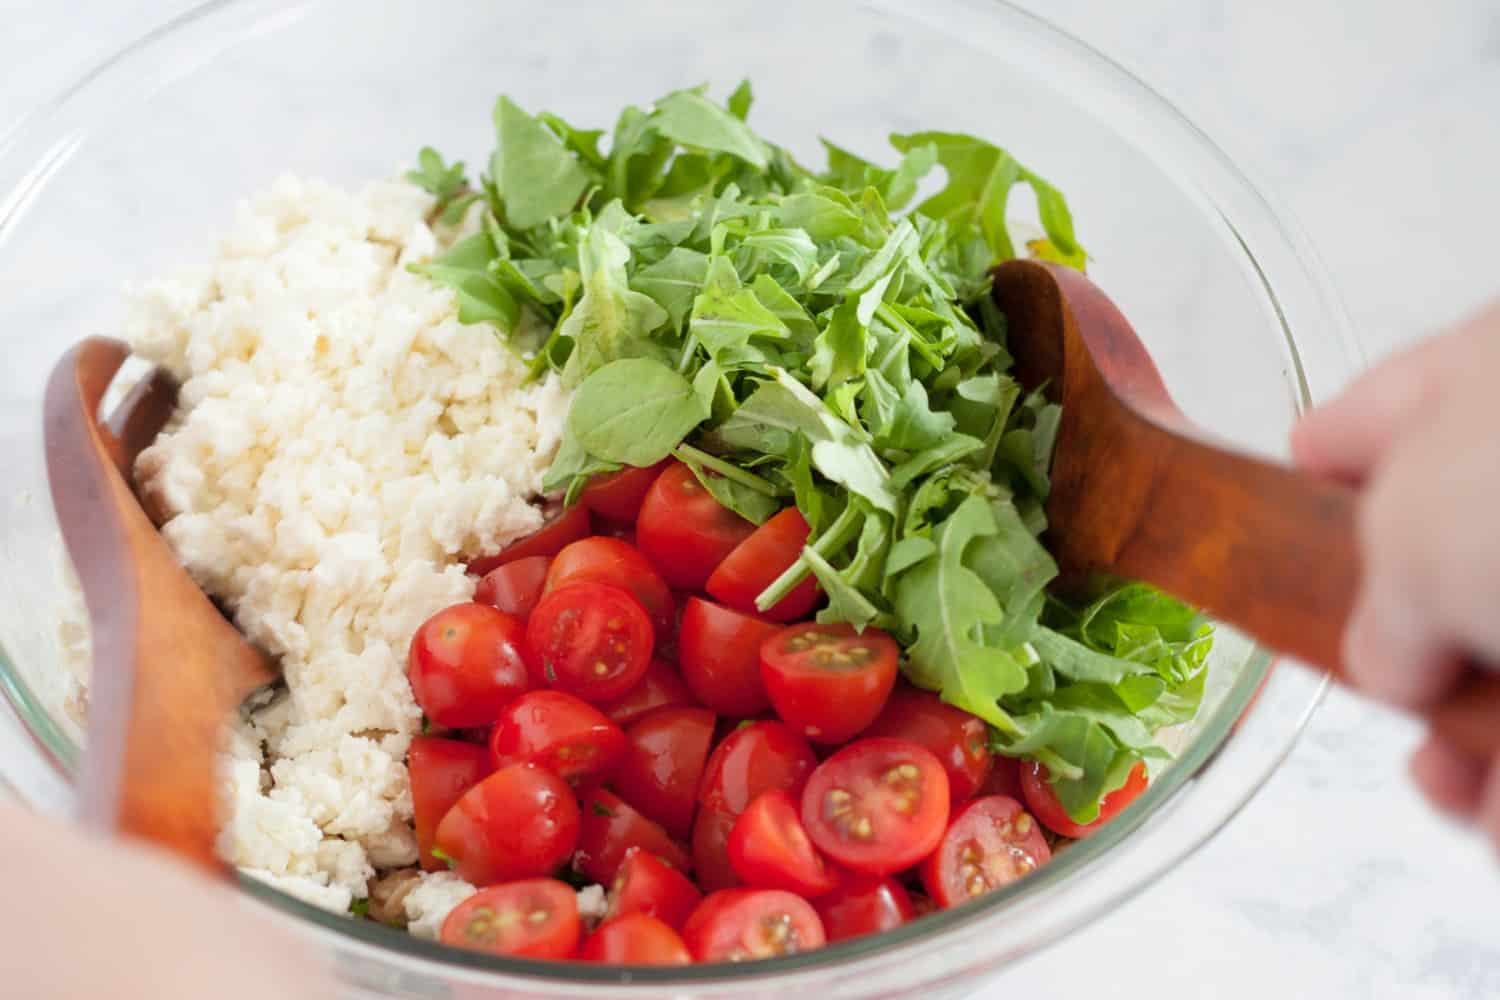 Bright Mediterranean inspired flavors make this feta farro salad a perfect main dish for a light meal, or a refreshing side for a picnic or barbecue. It's a great way to try ancient grains in your diet! * Recipe on GoodieGodmother.com